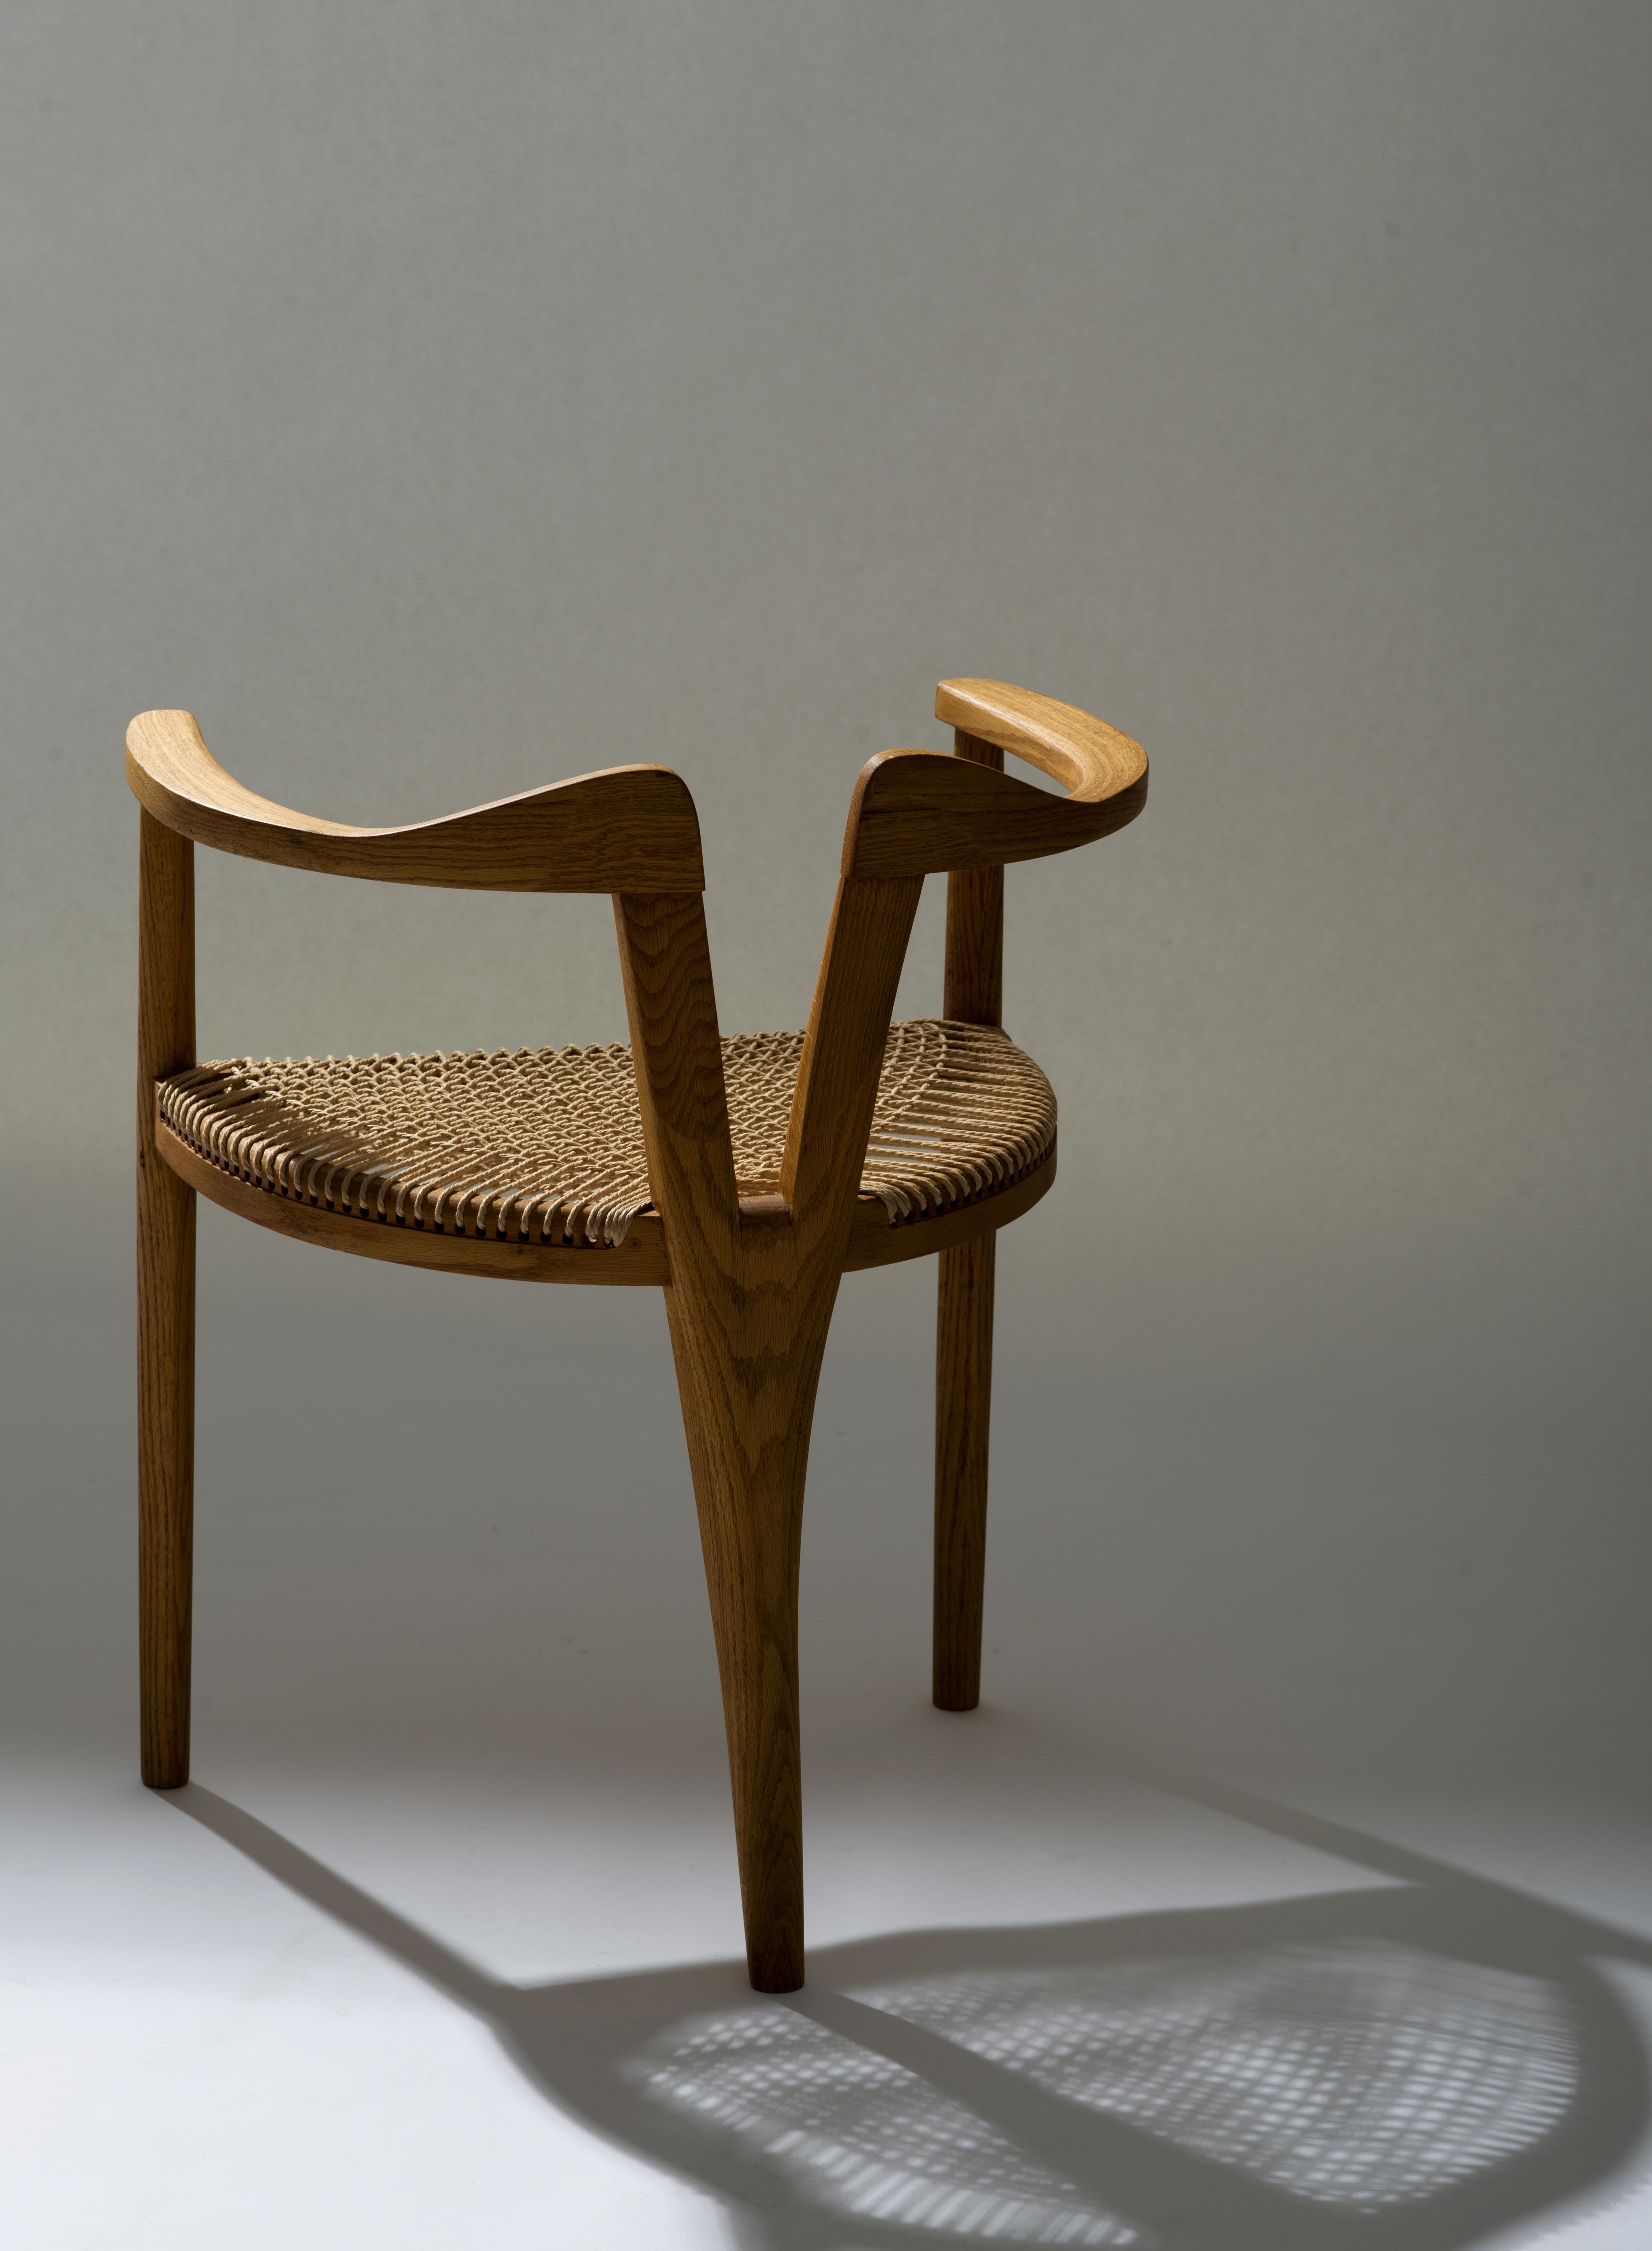 American Studio Craft Tri-Leg Chair in Oak with Woven Seat after Hans Wegner 7